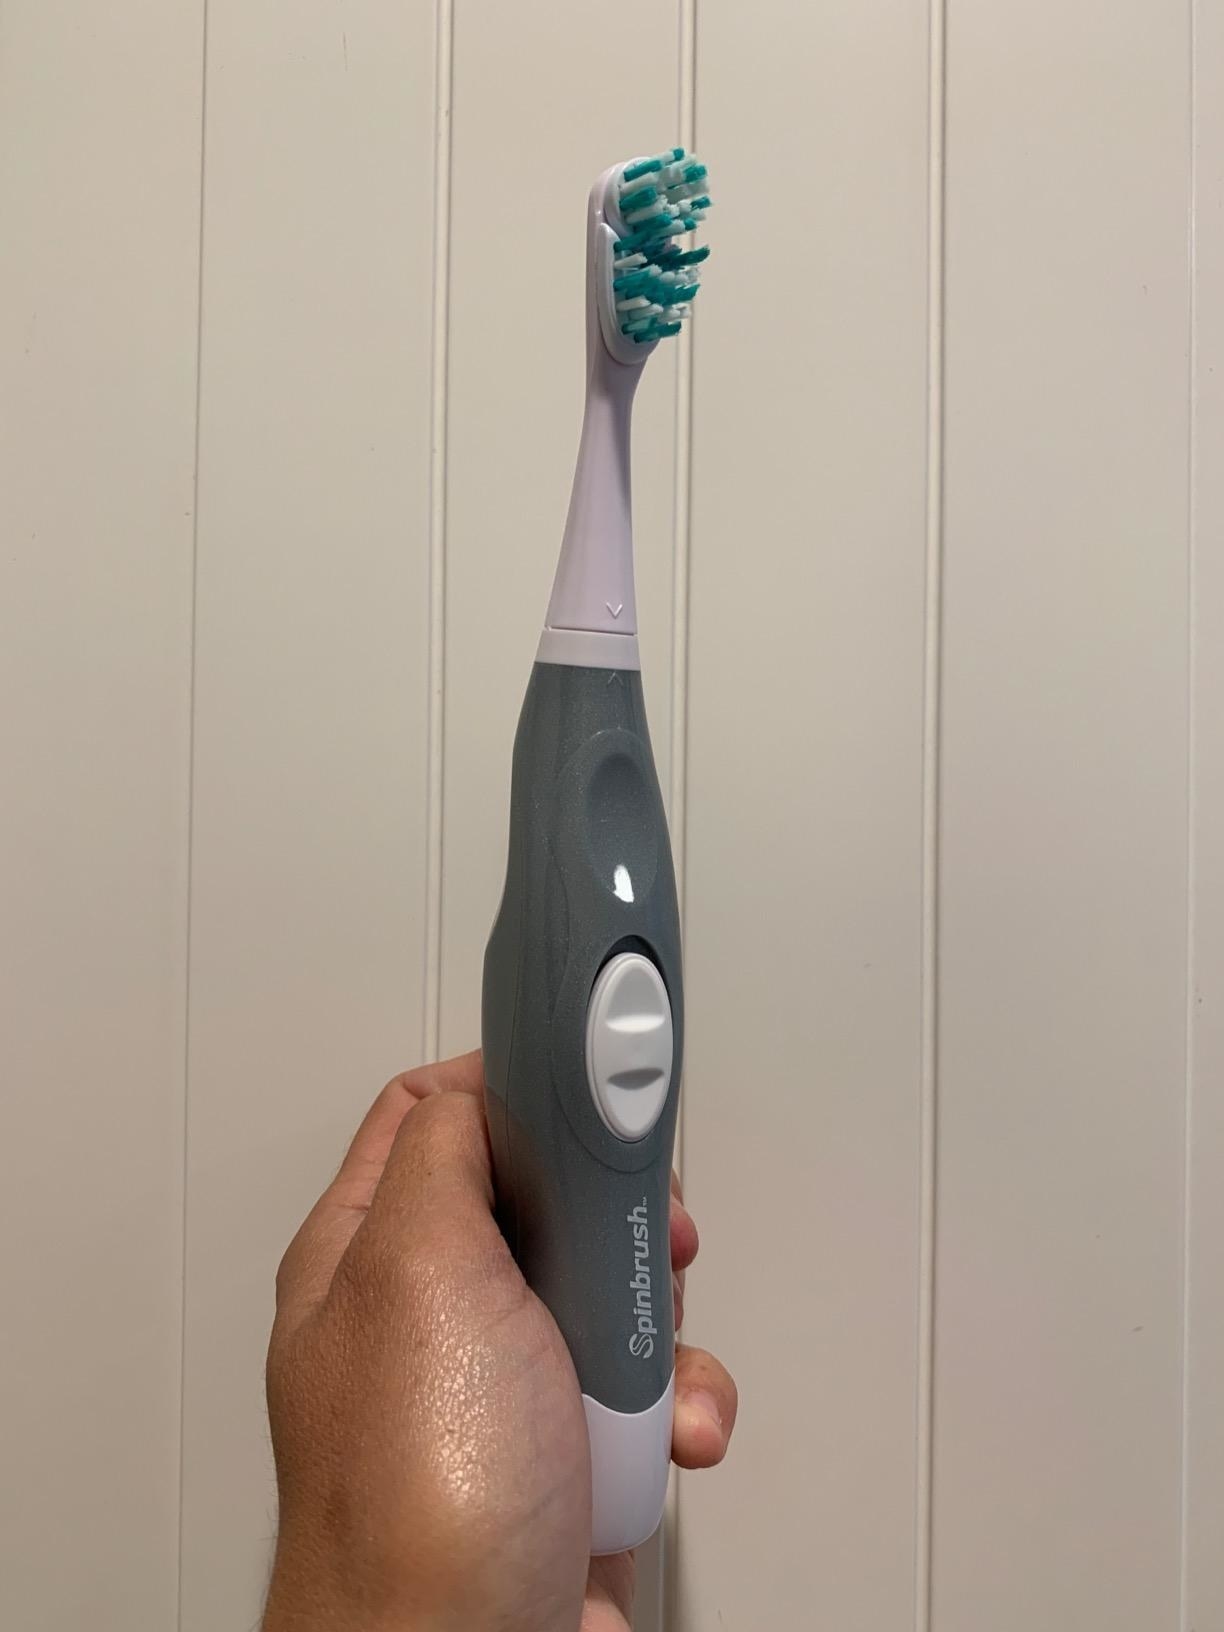 A reviewer&#x27;s hand holding a gray and white spin brush